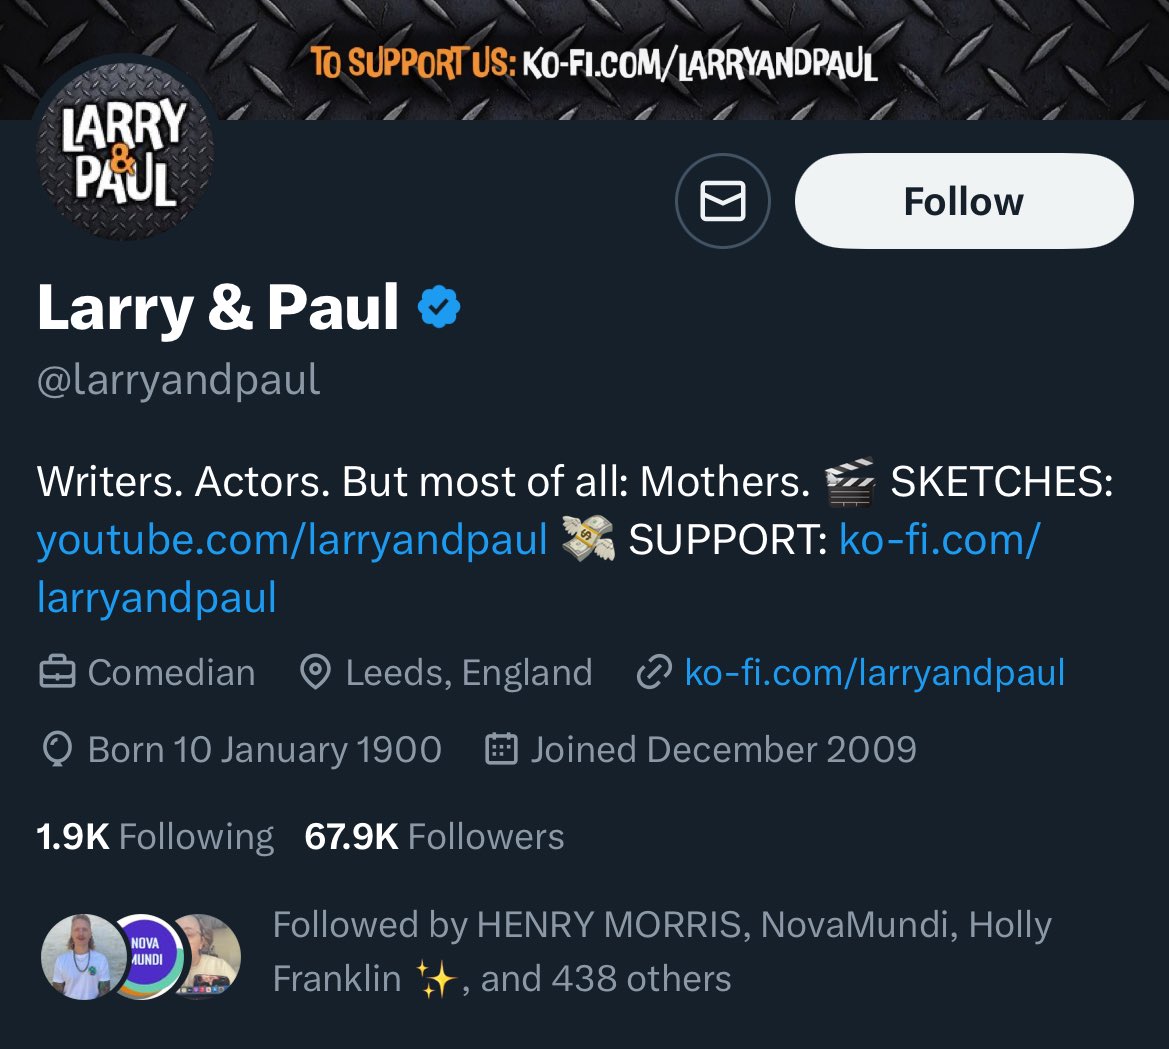 Well, this is concerning. Apparently I’ve unfollowed @larryandpaul - which is unlikely, considering I’m one of them. Anyone else noticing this sort of thing? @elonmusk